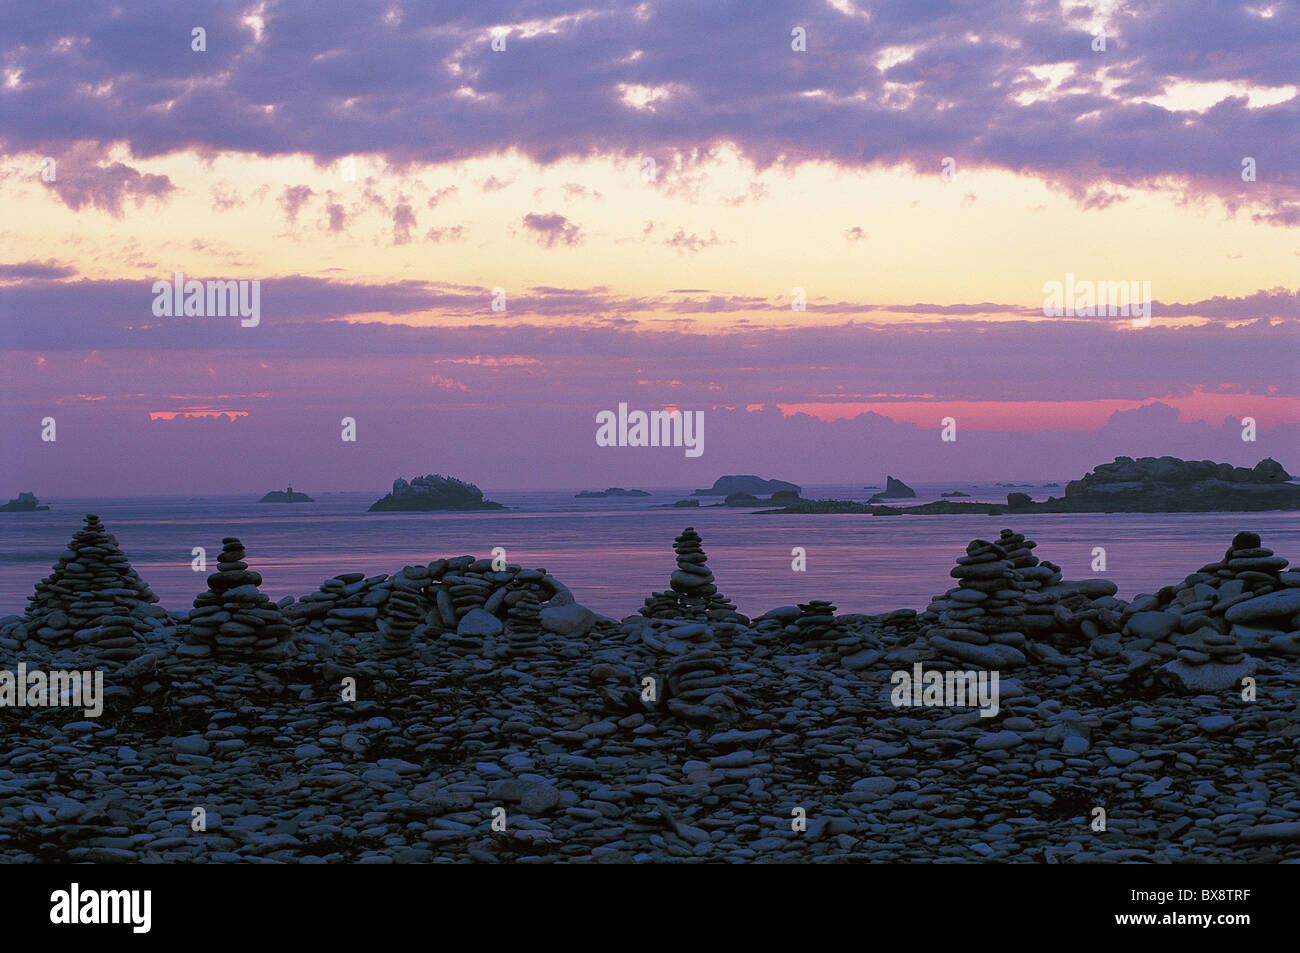 France, Brittany, Finistere, Sein Island, Sunset Stock Photo